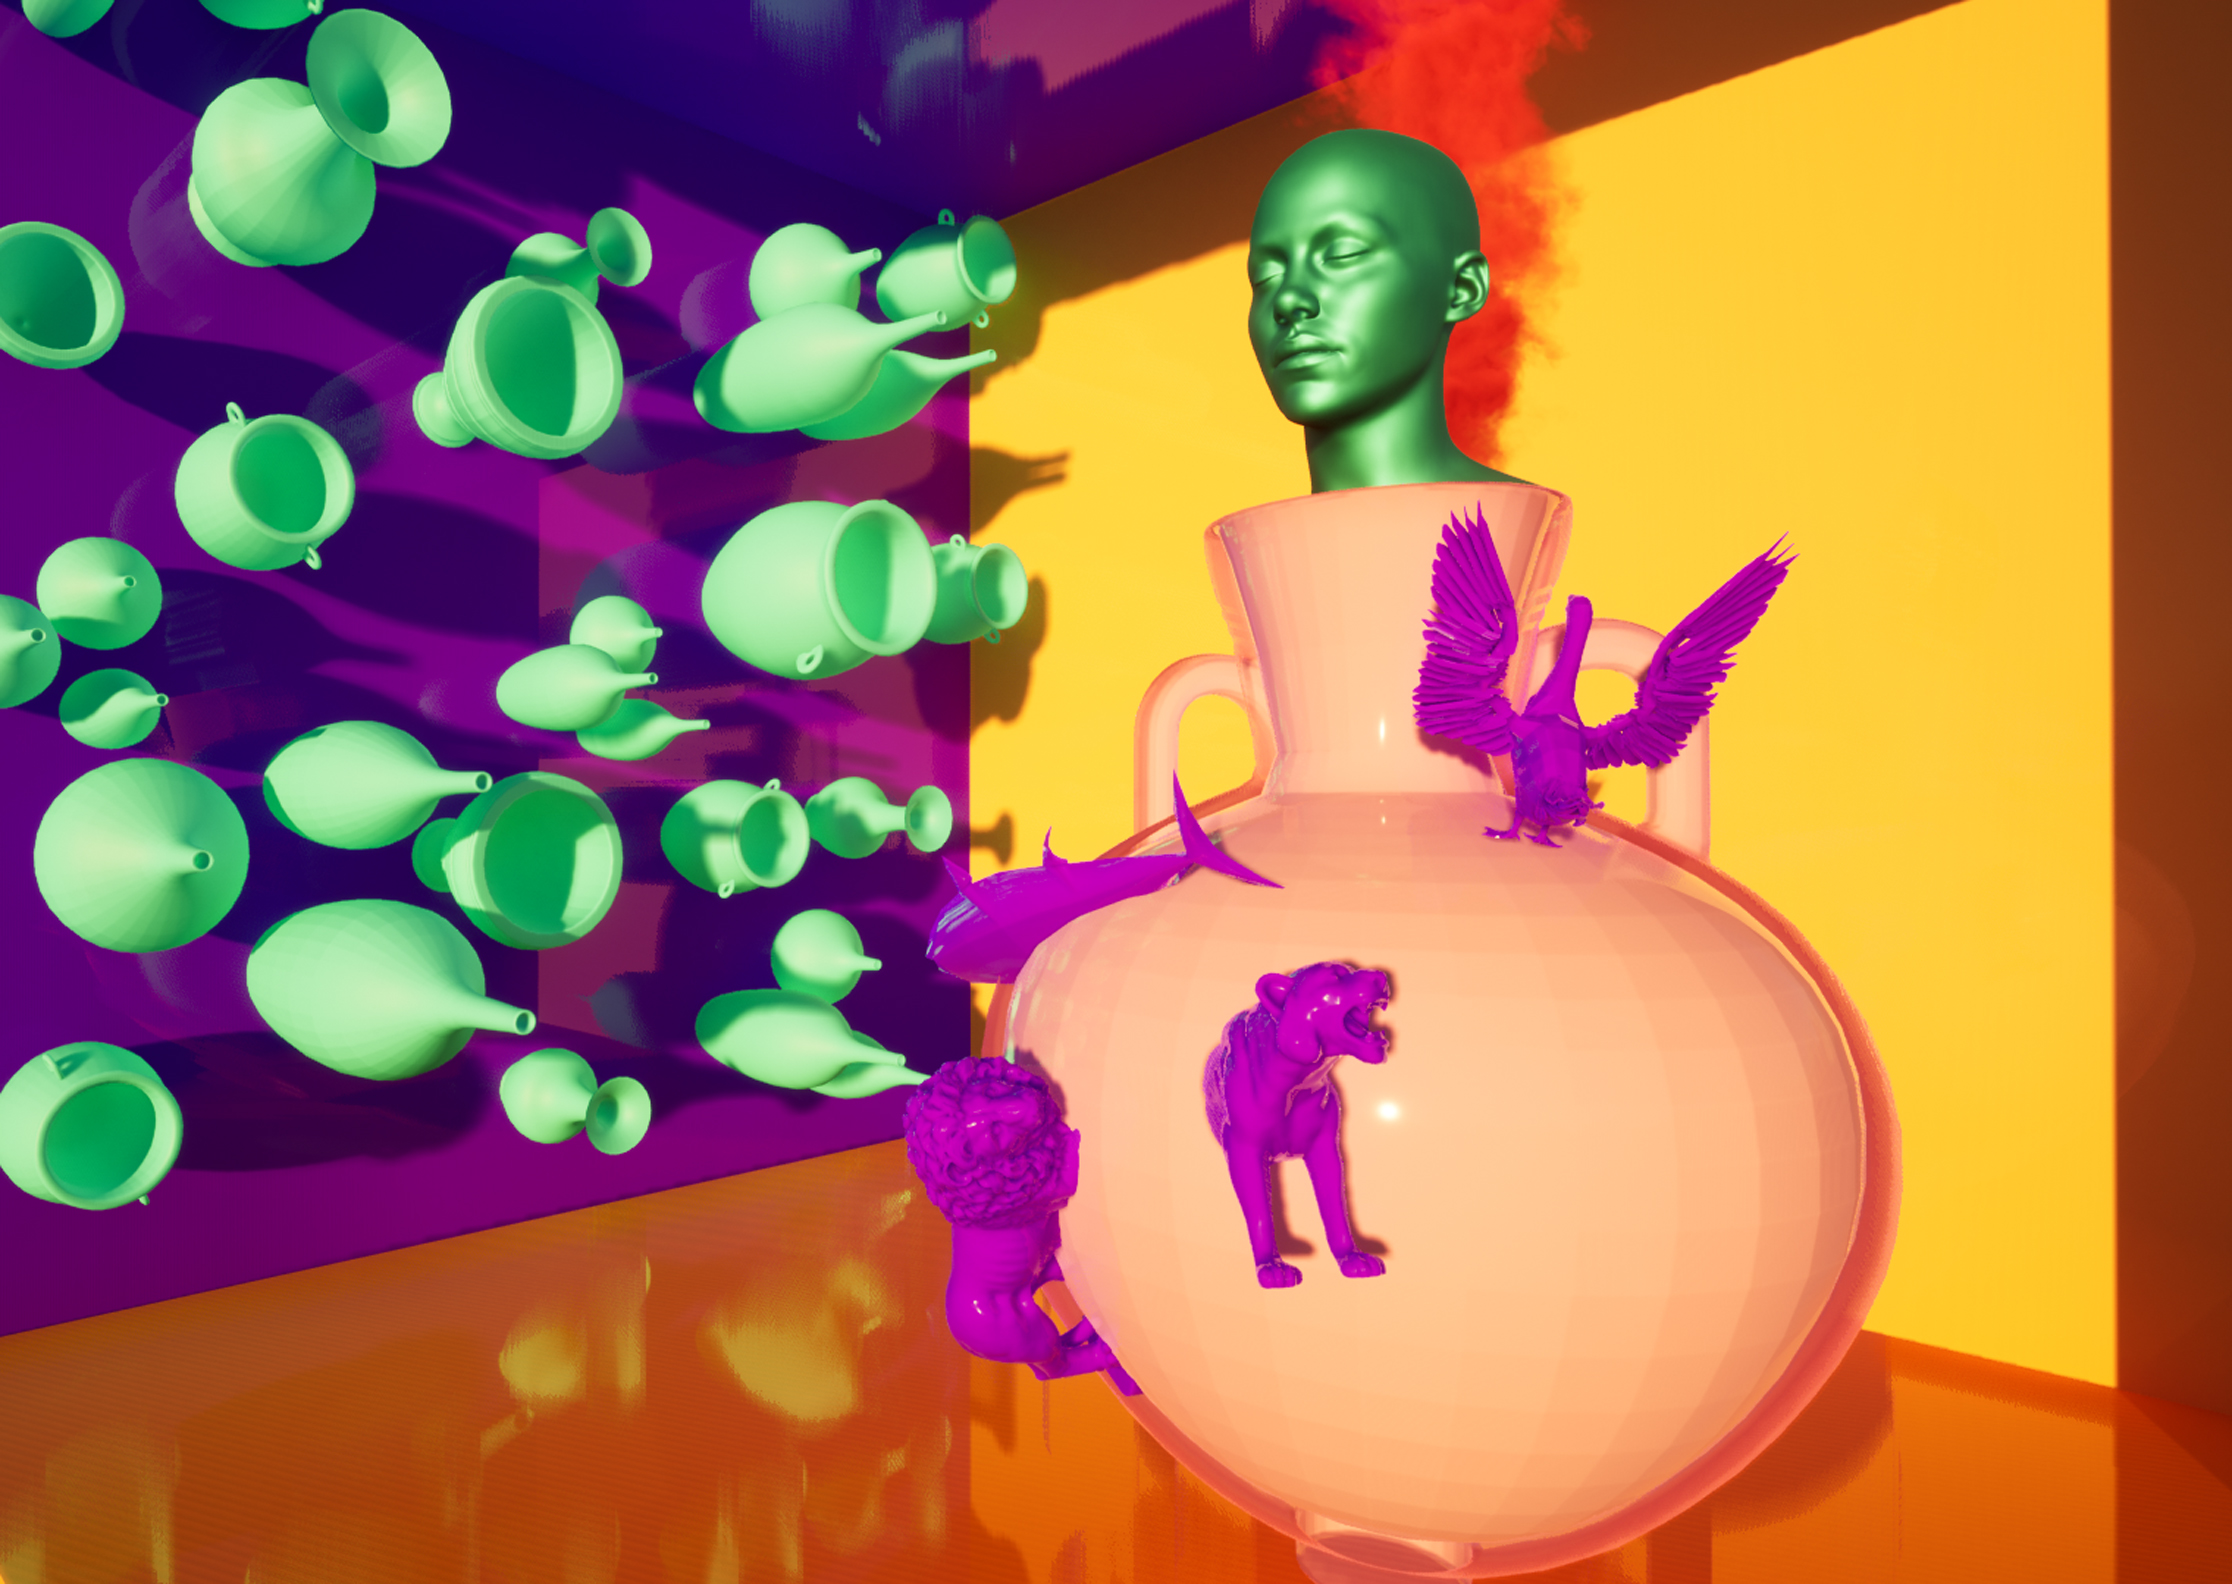 3d digitally modelled and rendered scene featuring muliple vases, a head and several animals